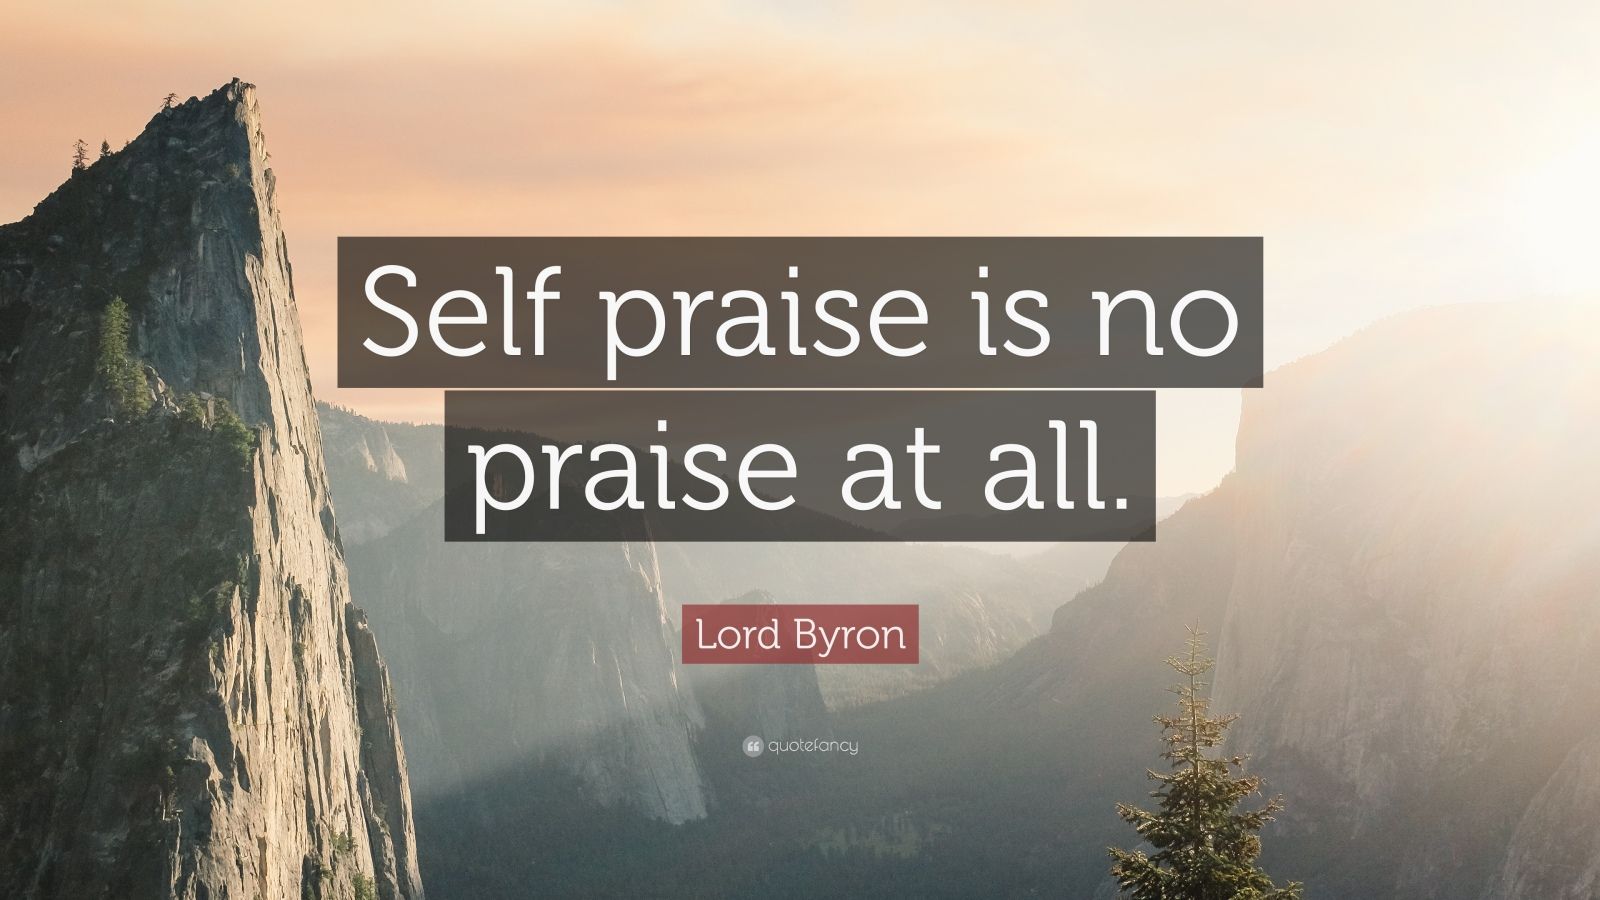 Lord Byron Quote: “Self praise is no praise at all.”